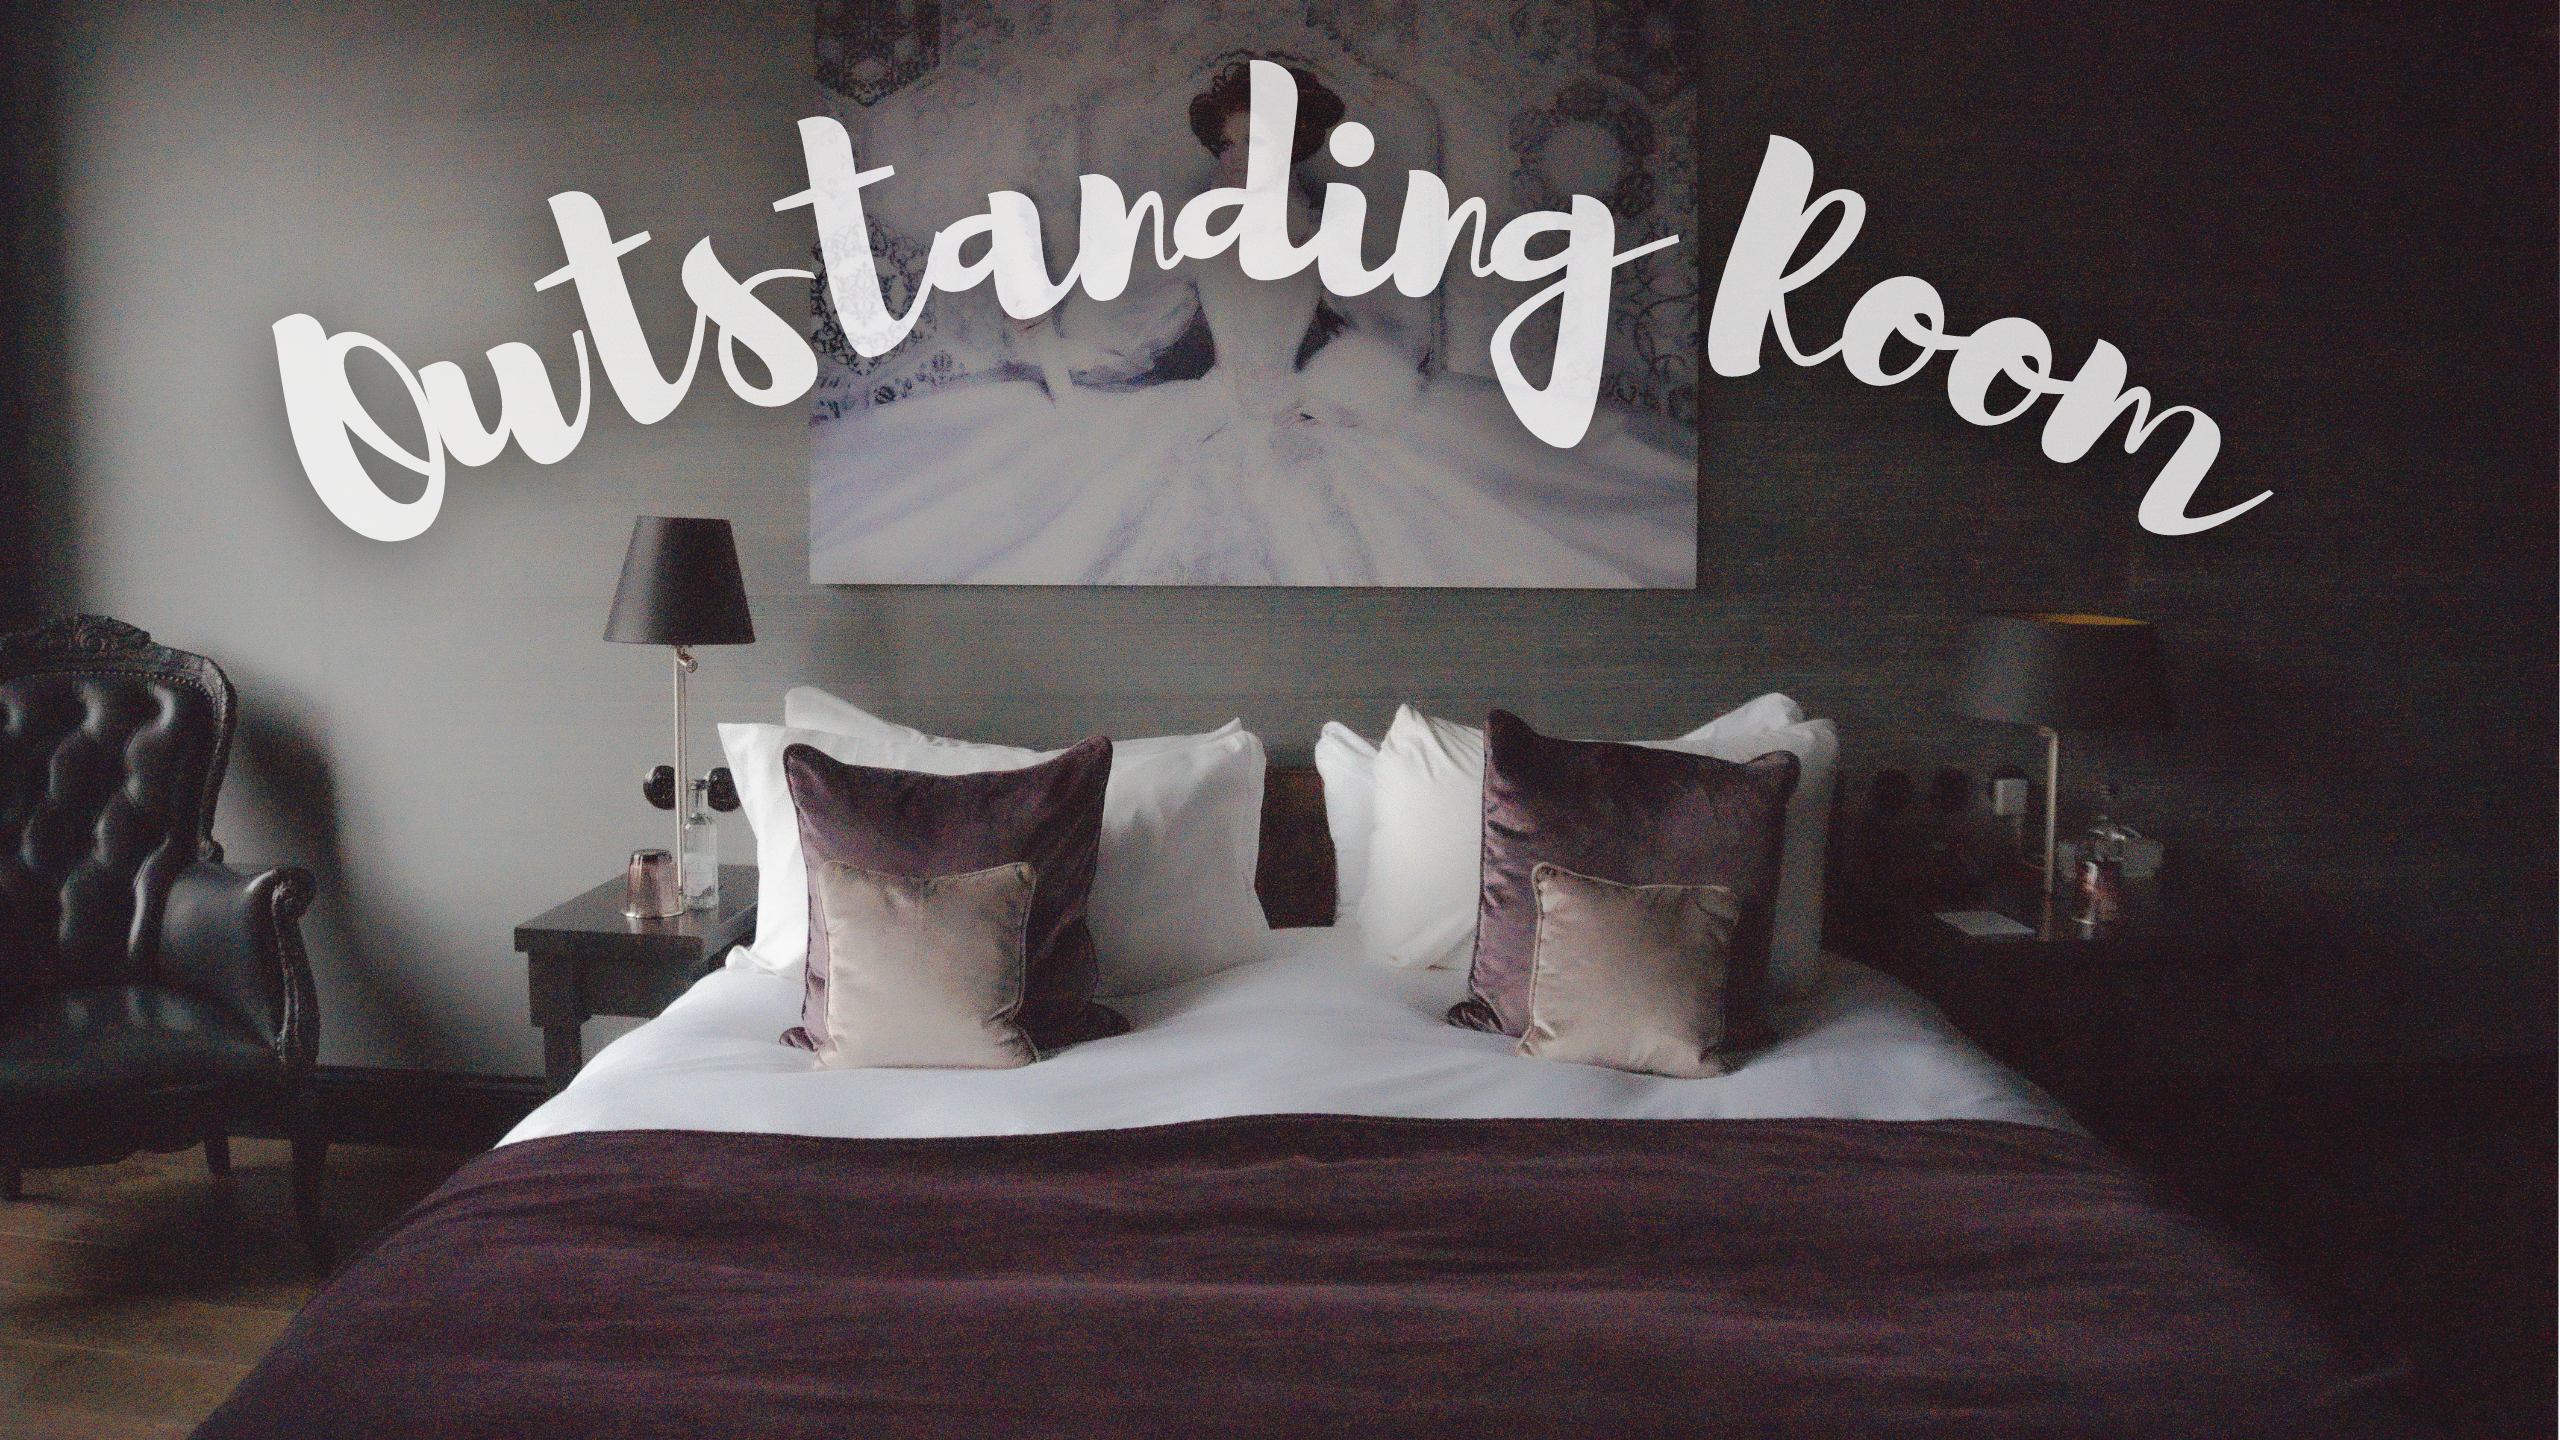 Canal House Amsterdam Outstanding Room Review